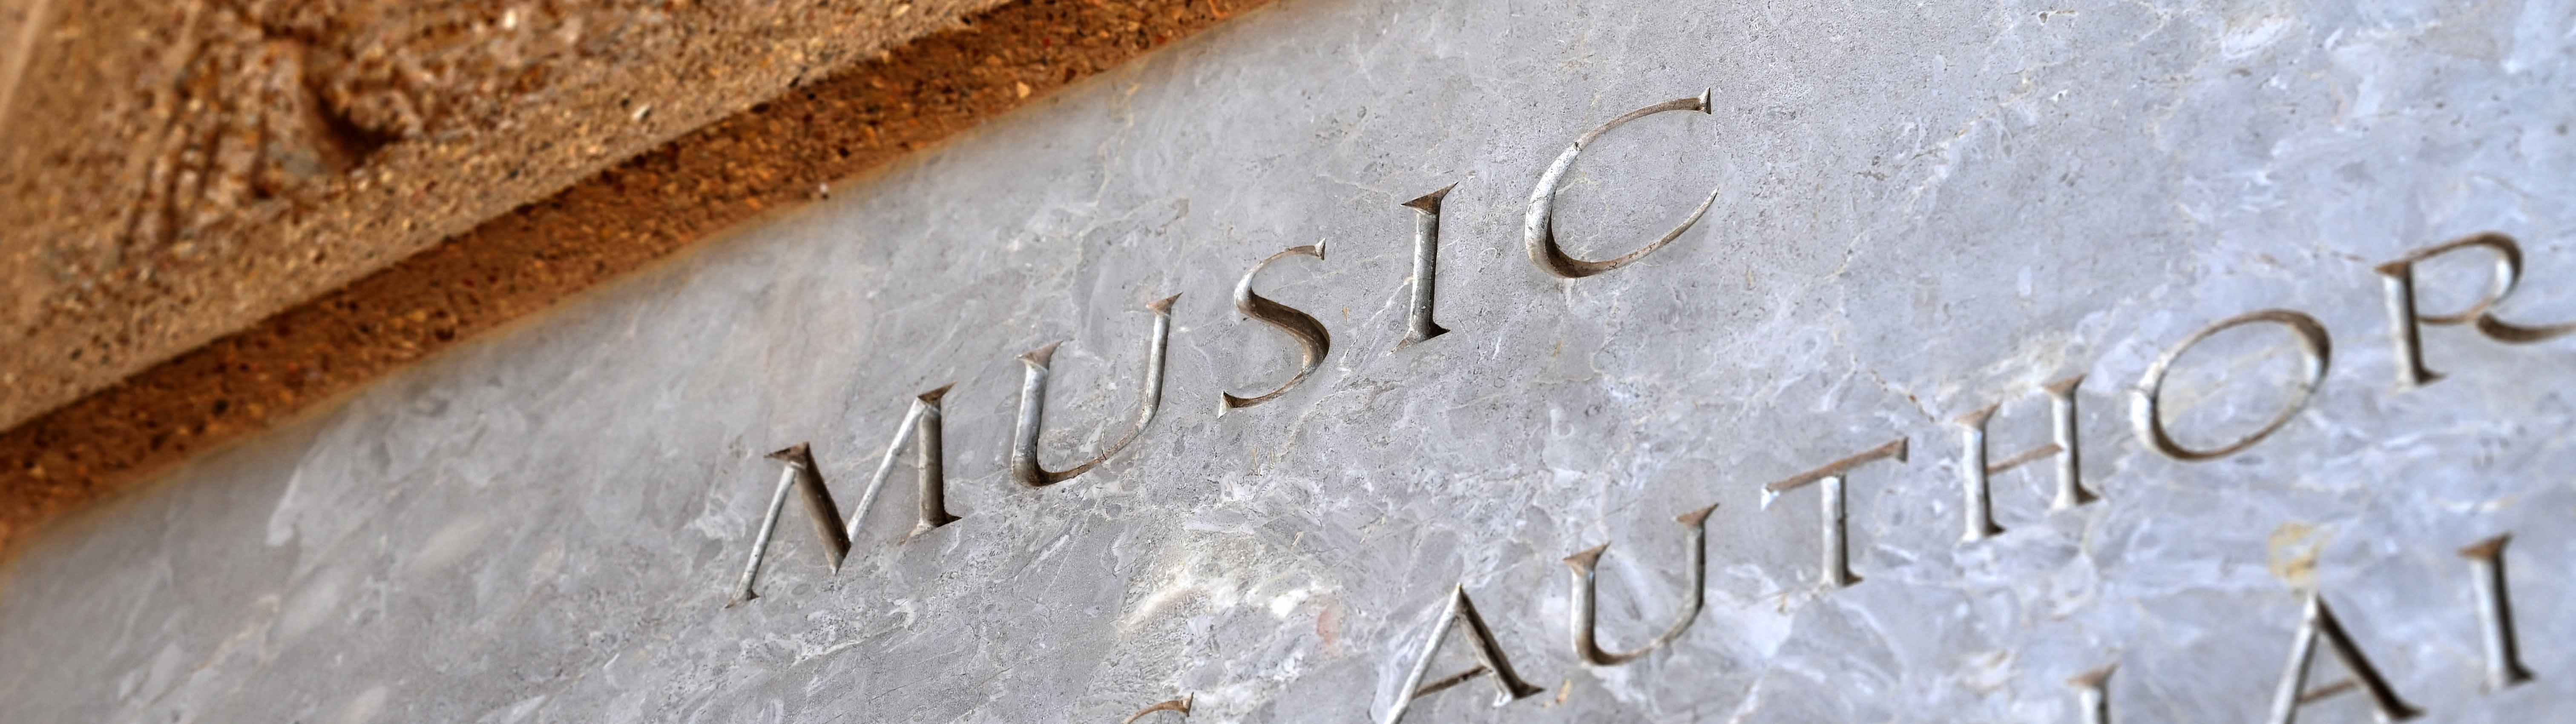 engraving of music on a wall